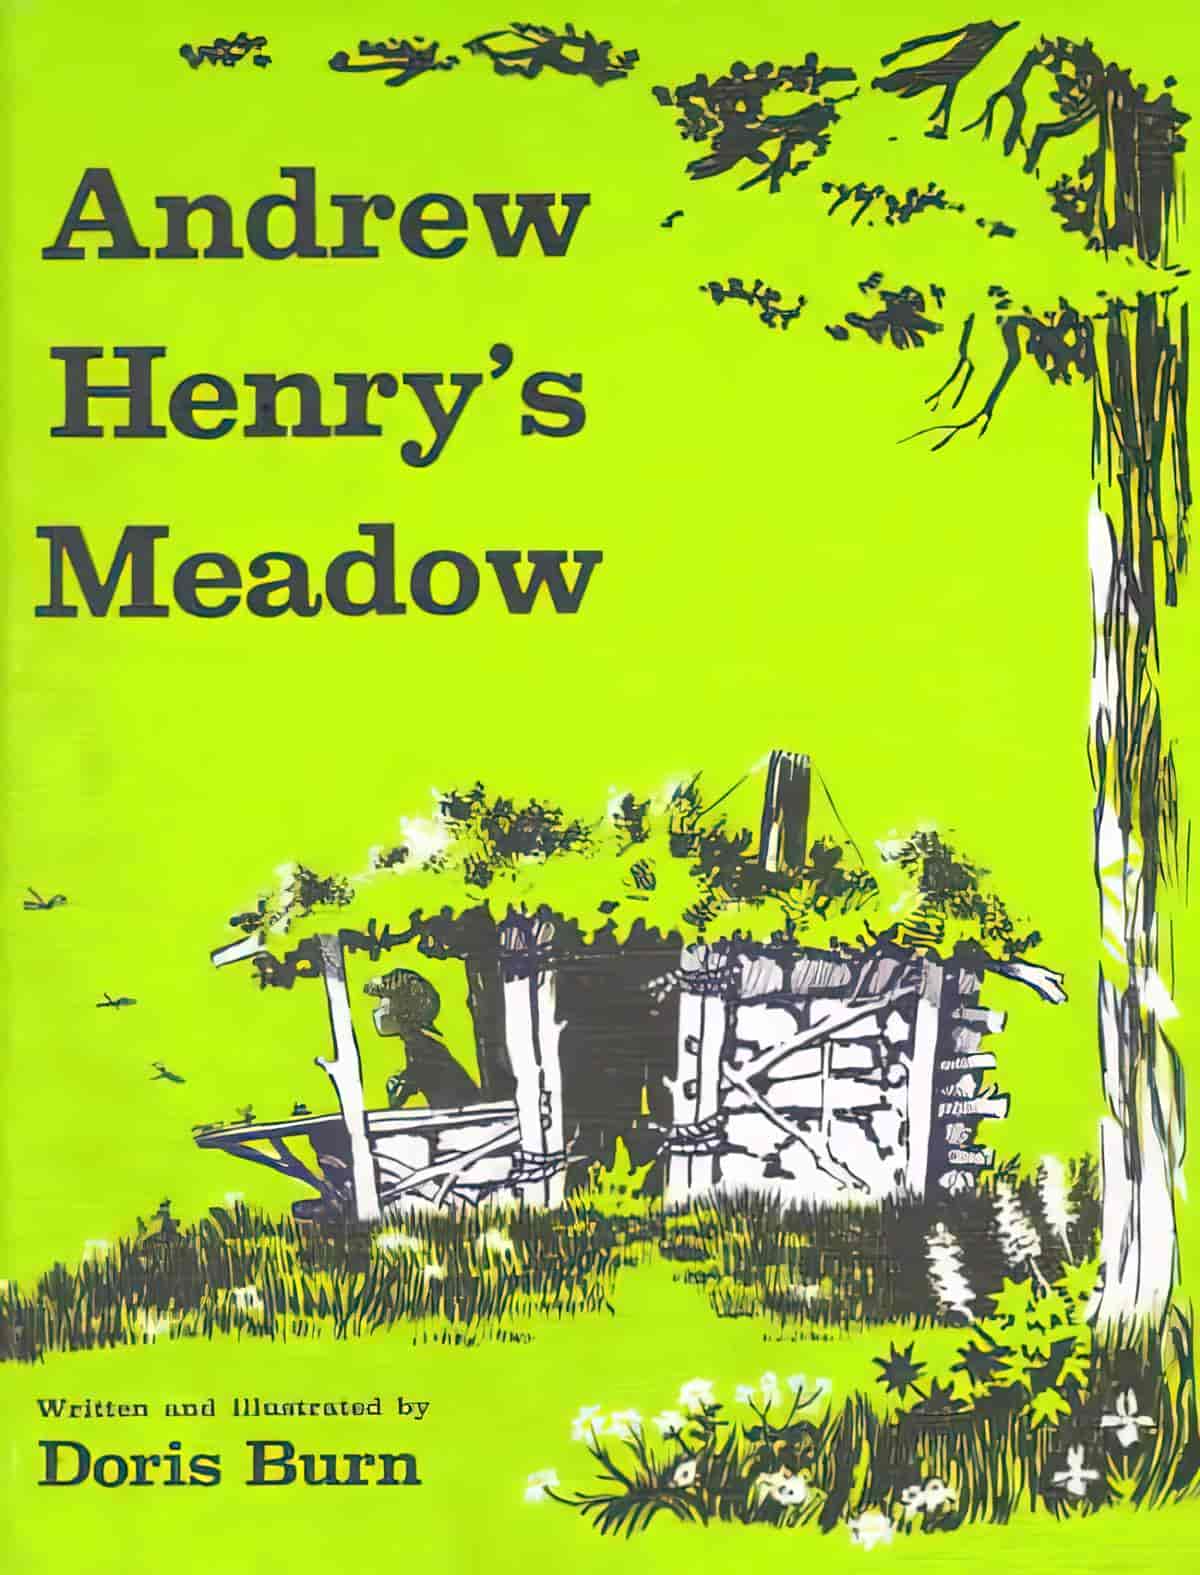 Andrew Henry’s Meadow Picture Book Analysis